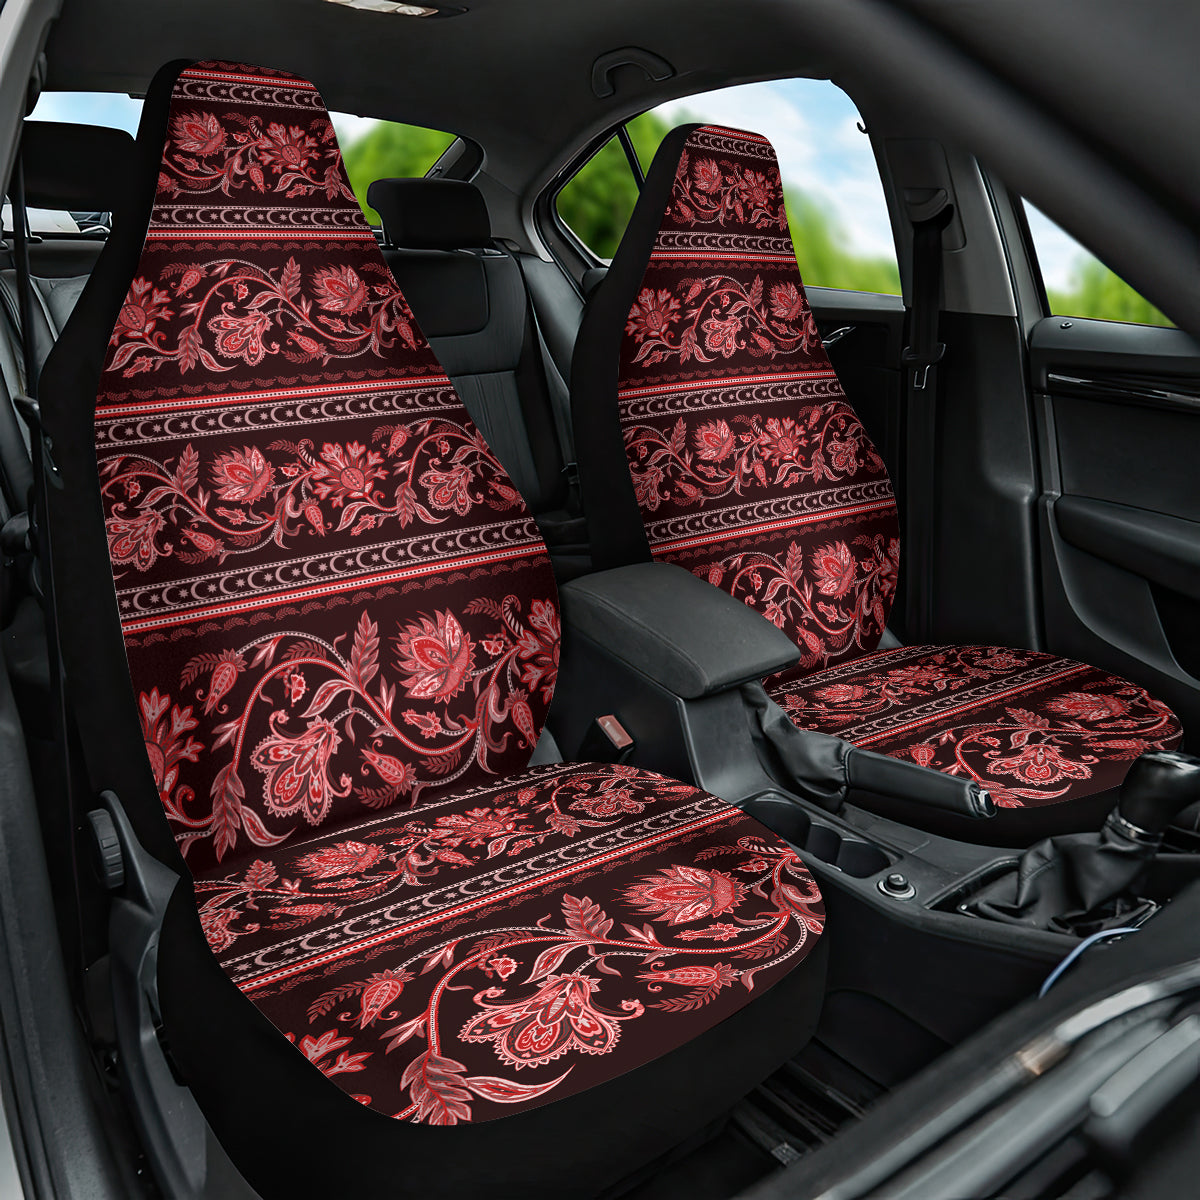 azerbaijan-car-seat-cover-traditional-pattern-ornament-with-flowers-buta-red